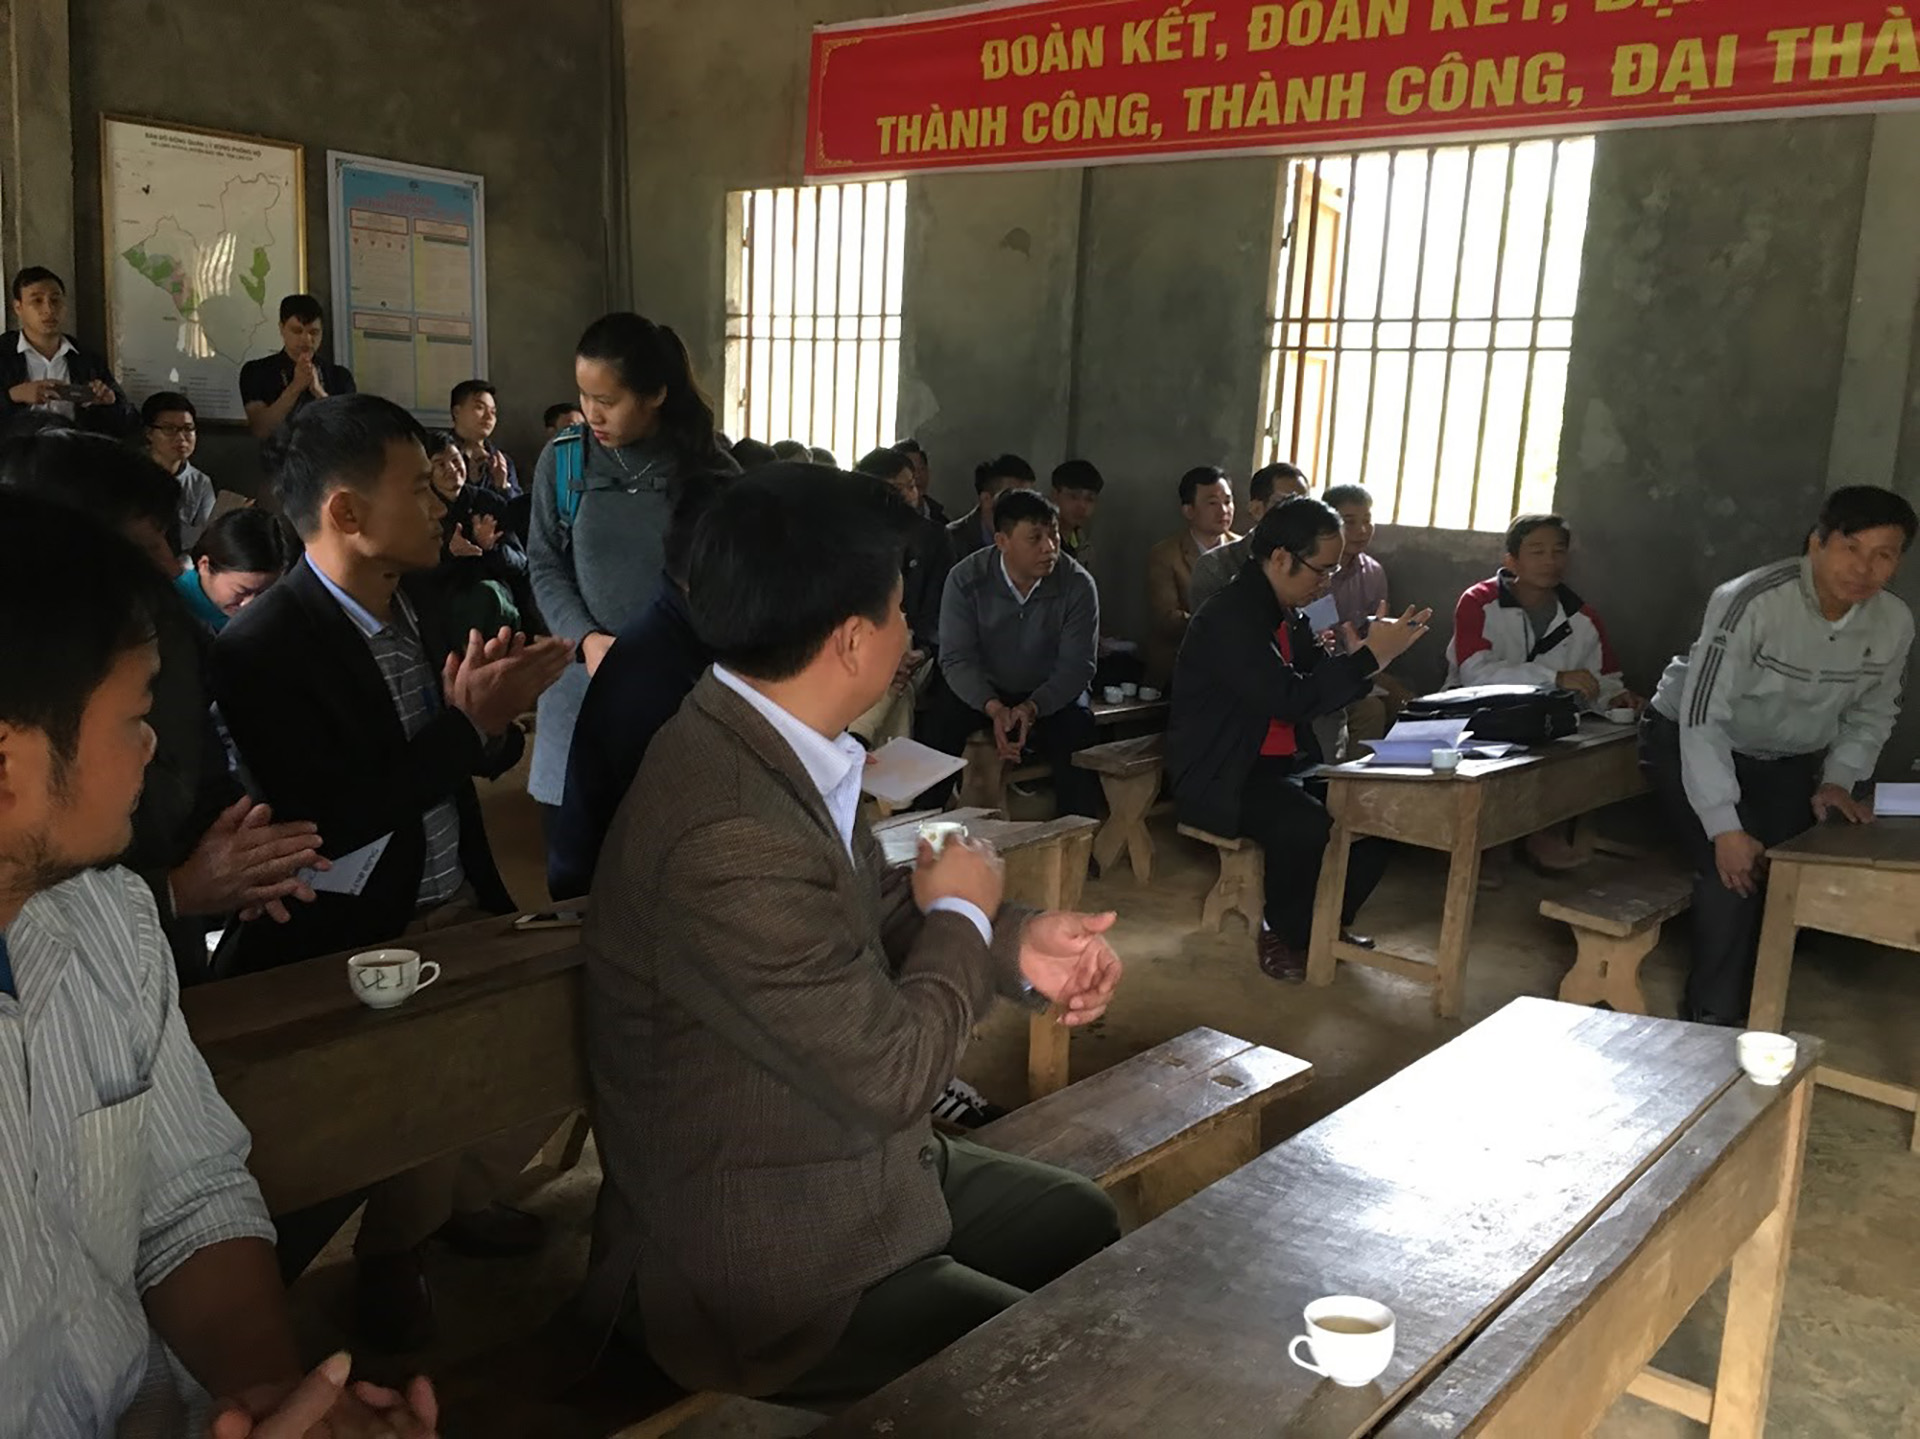 In-class discussion during a REDD+ Training course at VNUF REDD+ implementation site in Lao Cai province